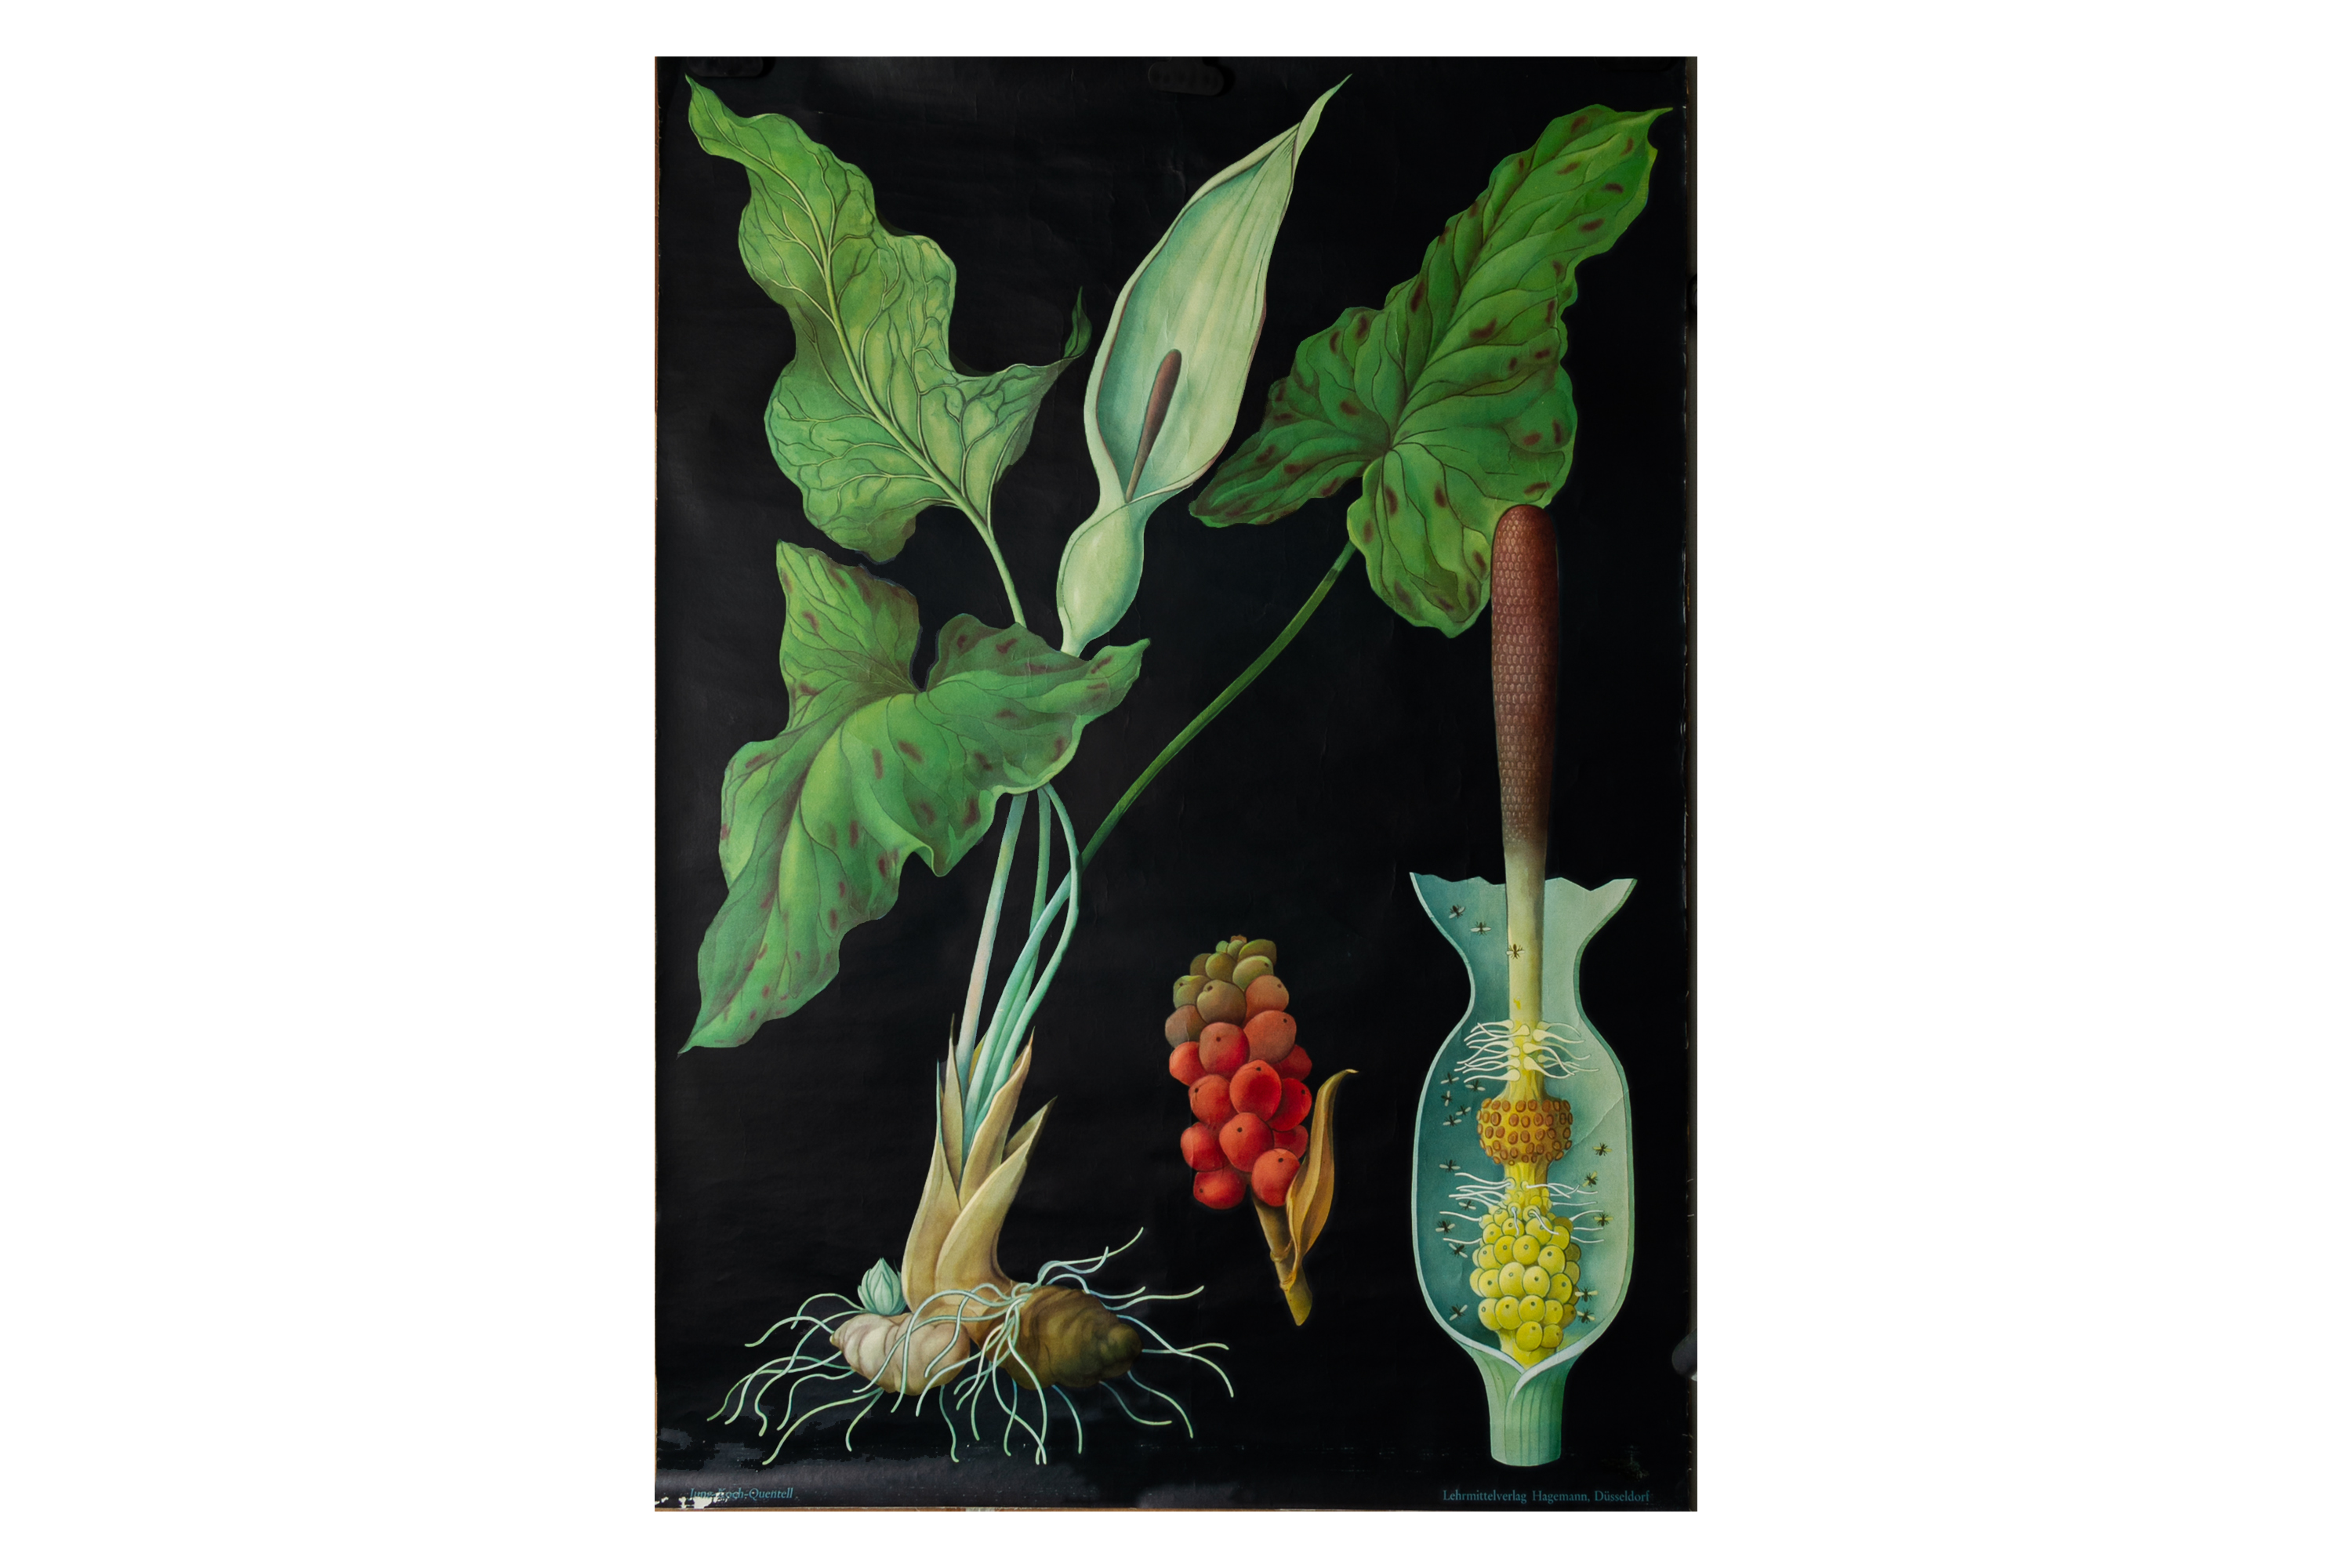 TWO GERMAN EDUCATIONAL POSTERS OF BOTANICALS - Image 3 of 3